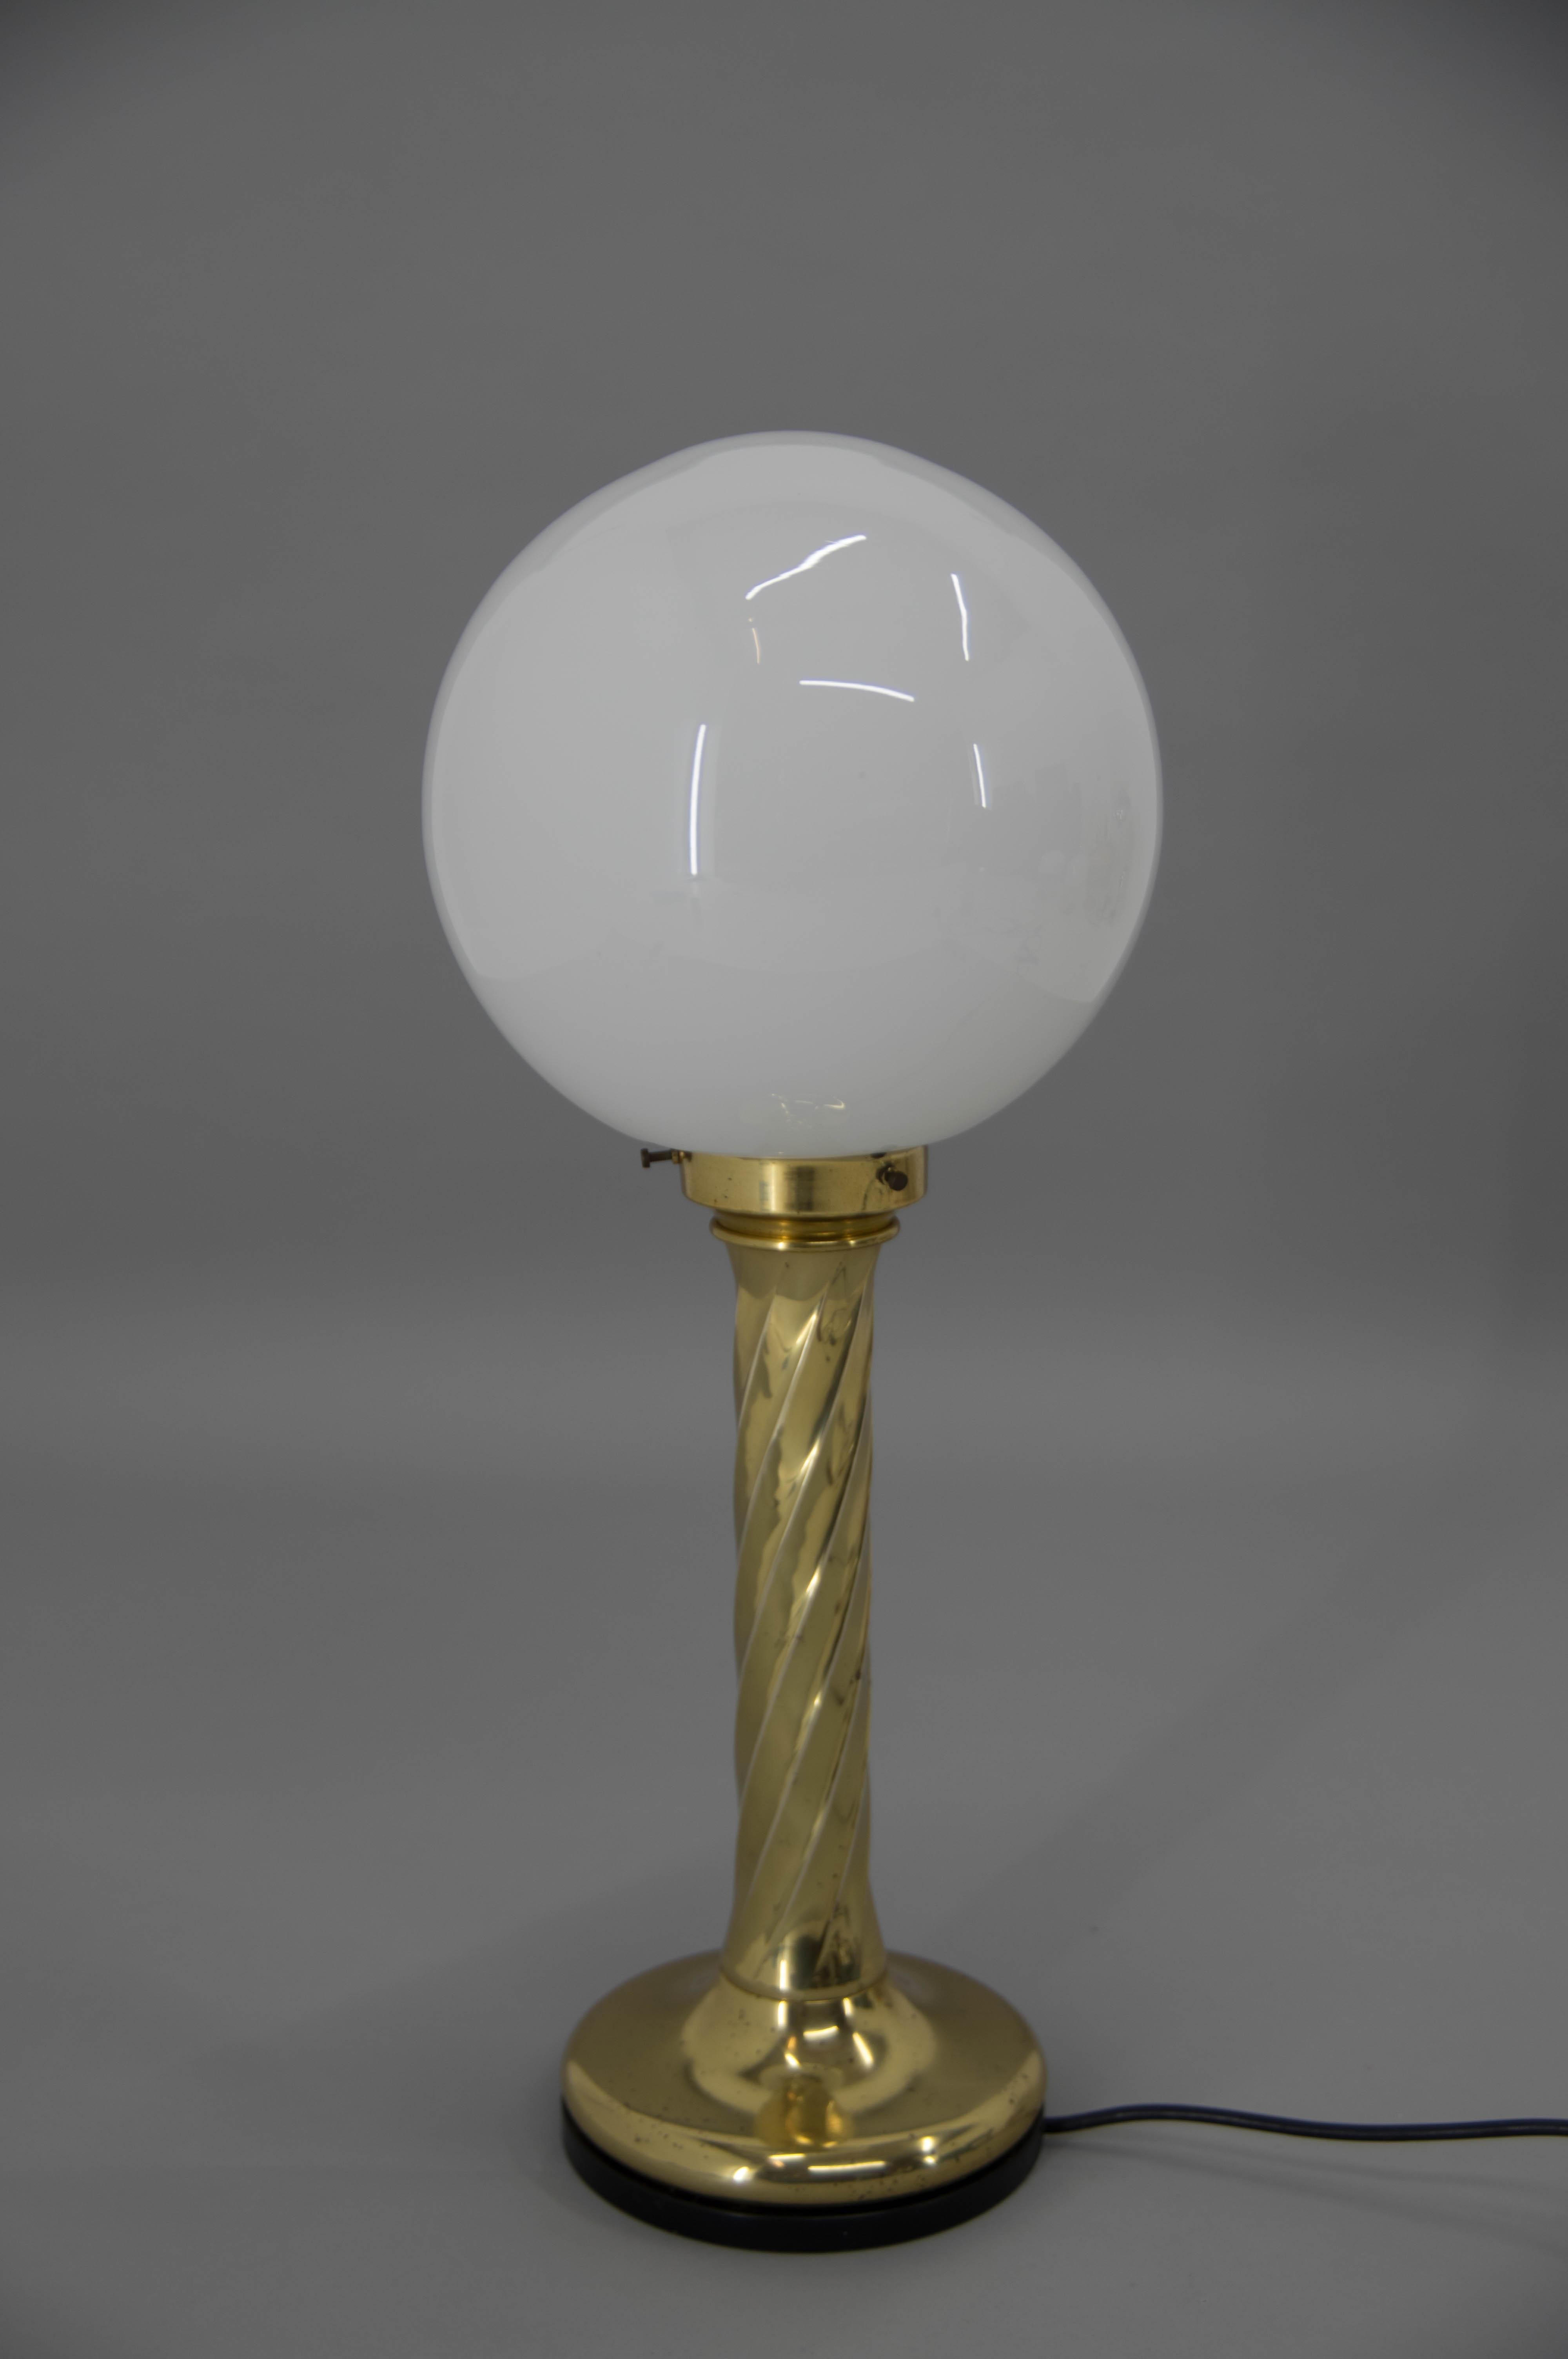 This BIG (height: 62cm, 24in) lamp could be used as floor lamp or table lamp.
It has brass base and opaline glass shade.
Nice age patina on brass.
1x60W, E25-E27 bulb
US plug adapter included.